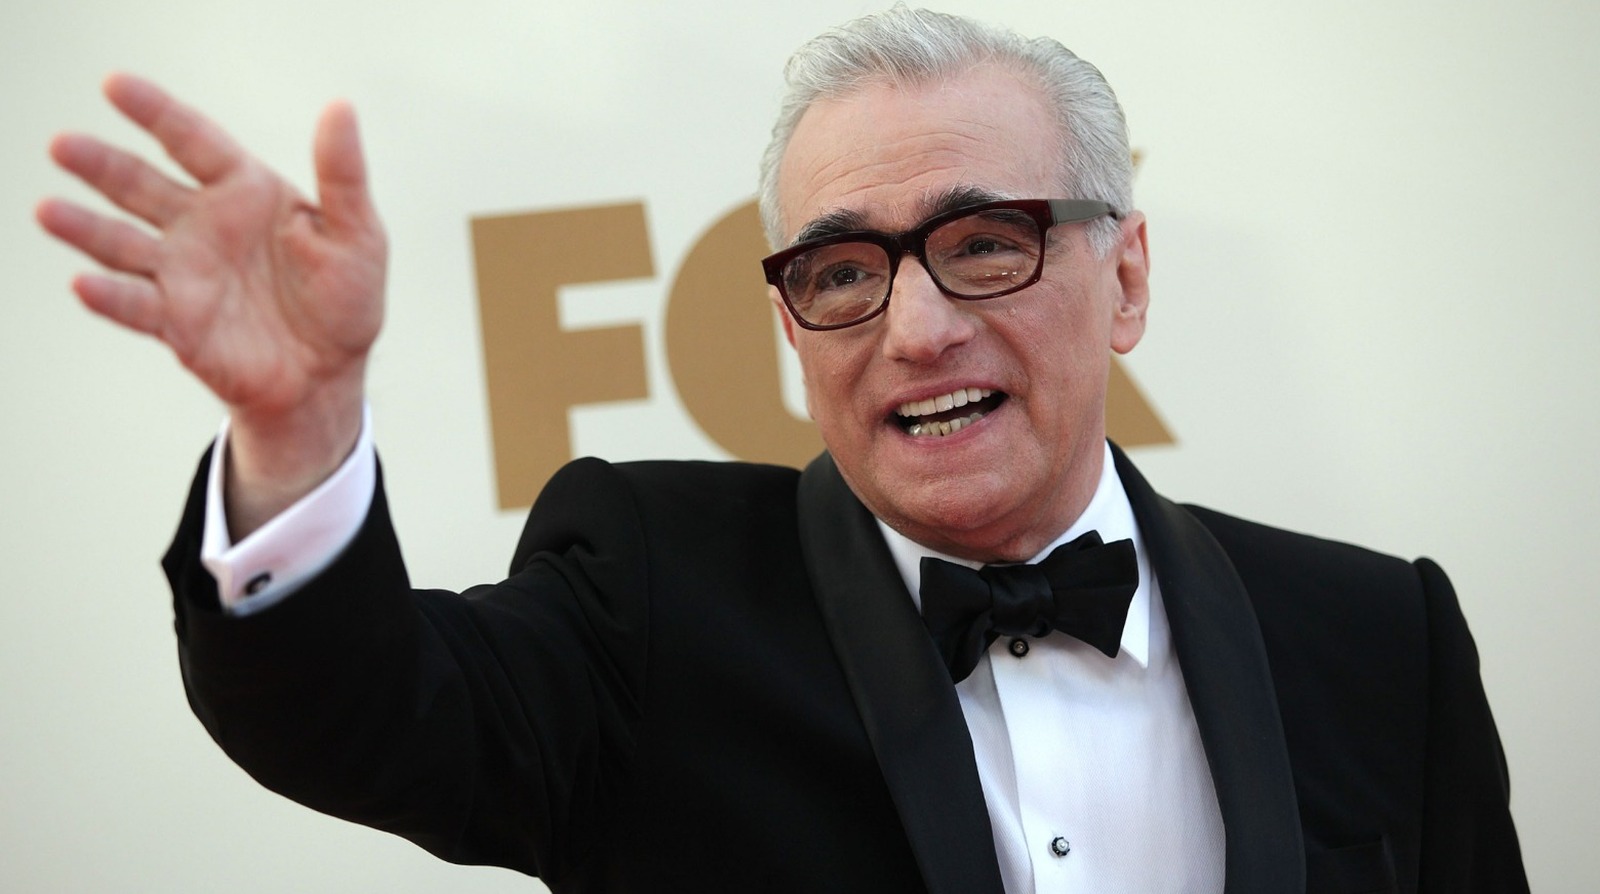 Martin Scorsese Net Worth - From "Mean Streets" To "The Wolf Of Wall Street"